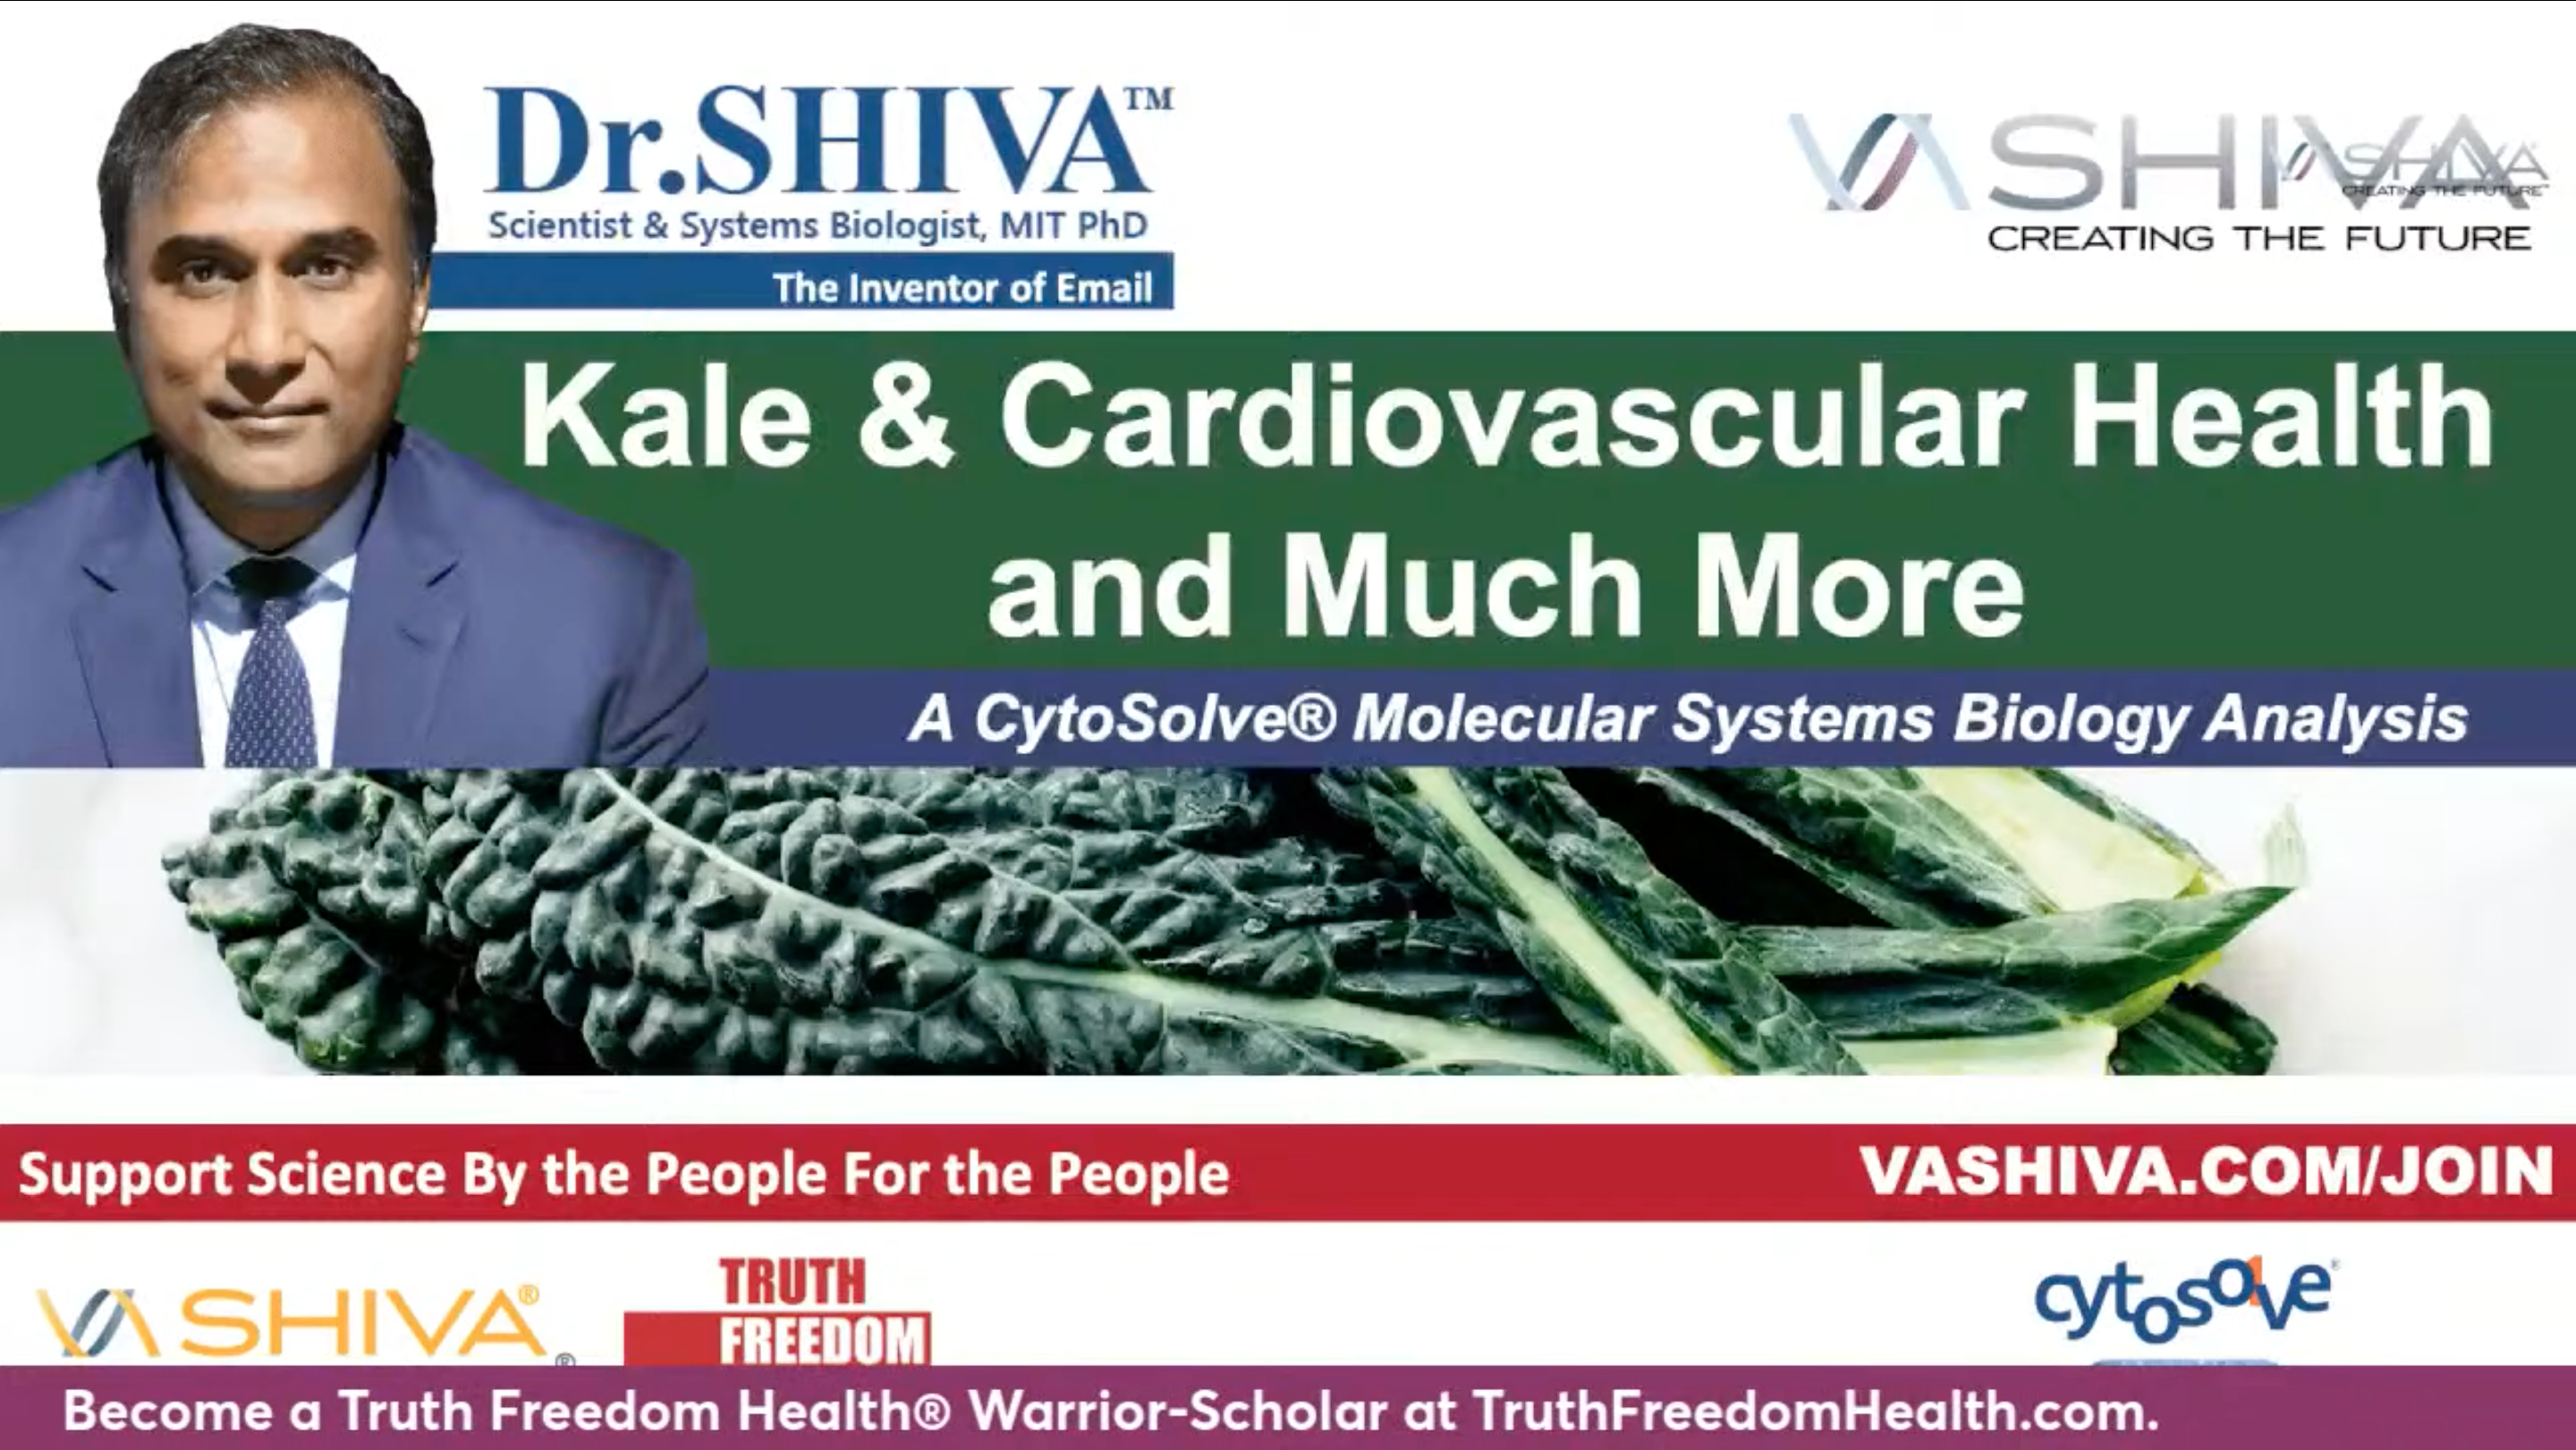 Dr.SHIVA LIVE: Kale & Cardiovascular Health and Much More.